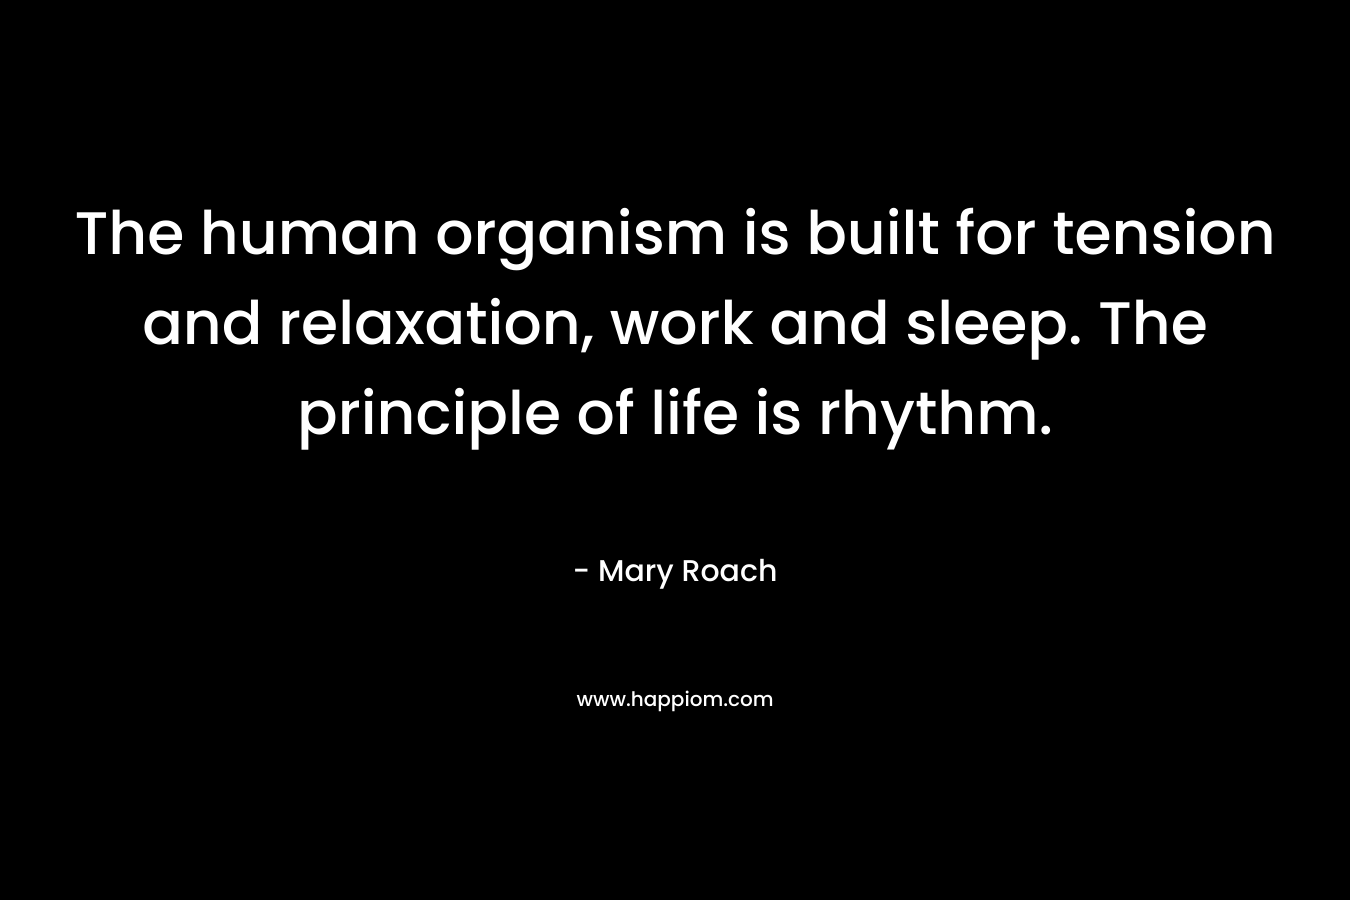 The human organism is built for tension and relaxation, work and sleep. The principle of life is rhythm.